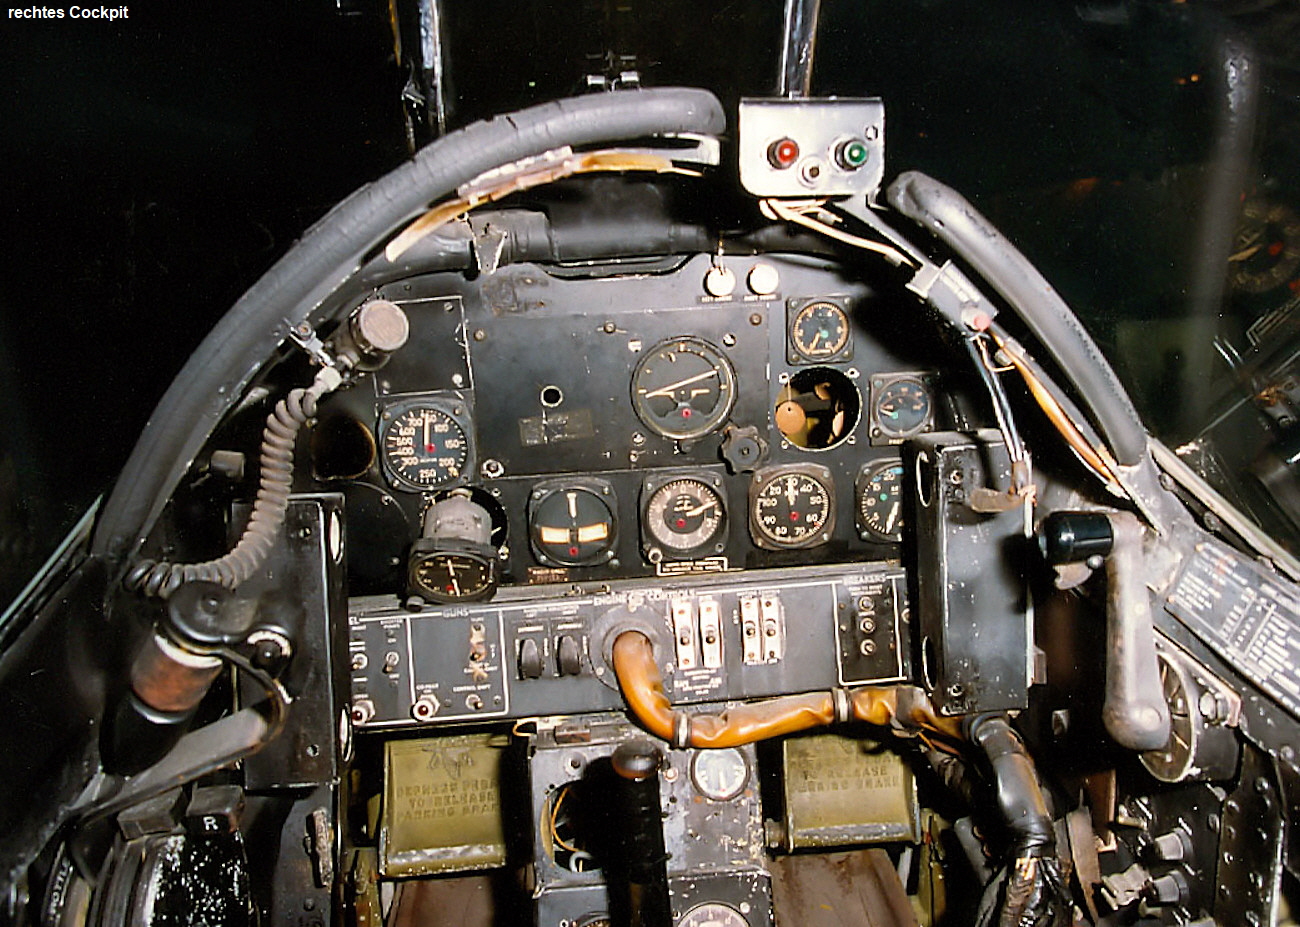 North American F-82B Twin Mustang rechtes Cockpit